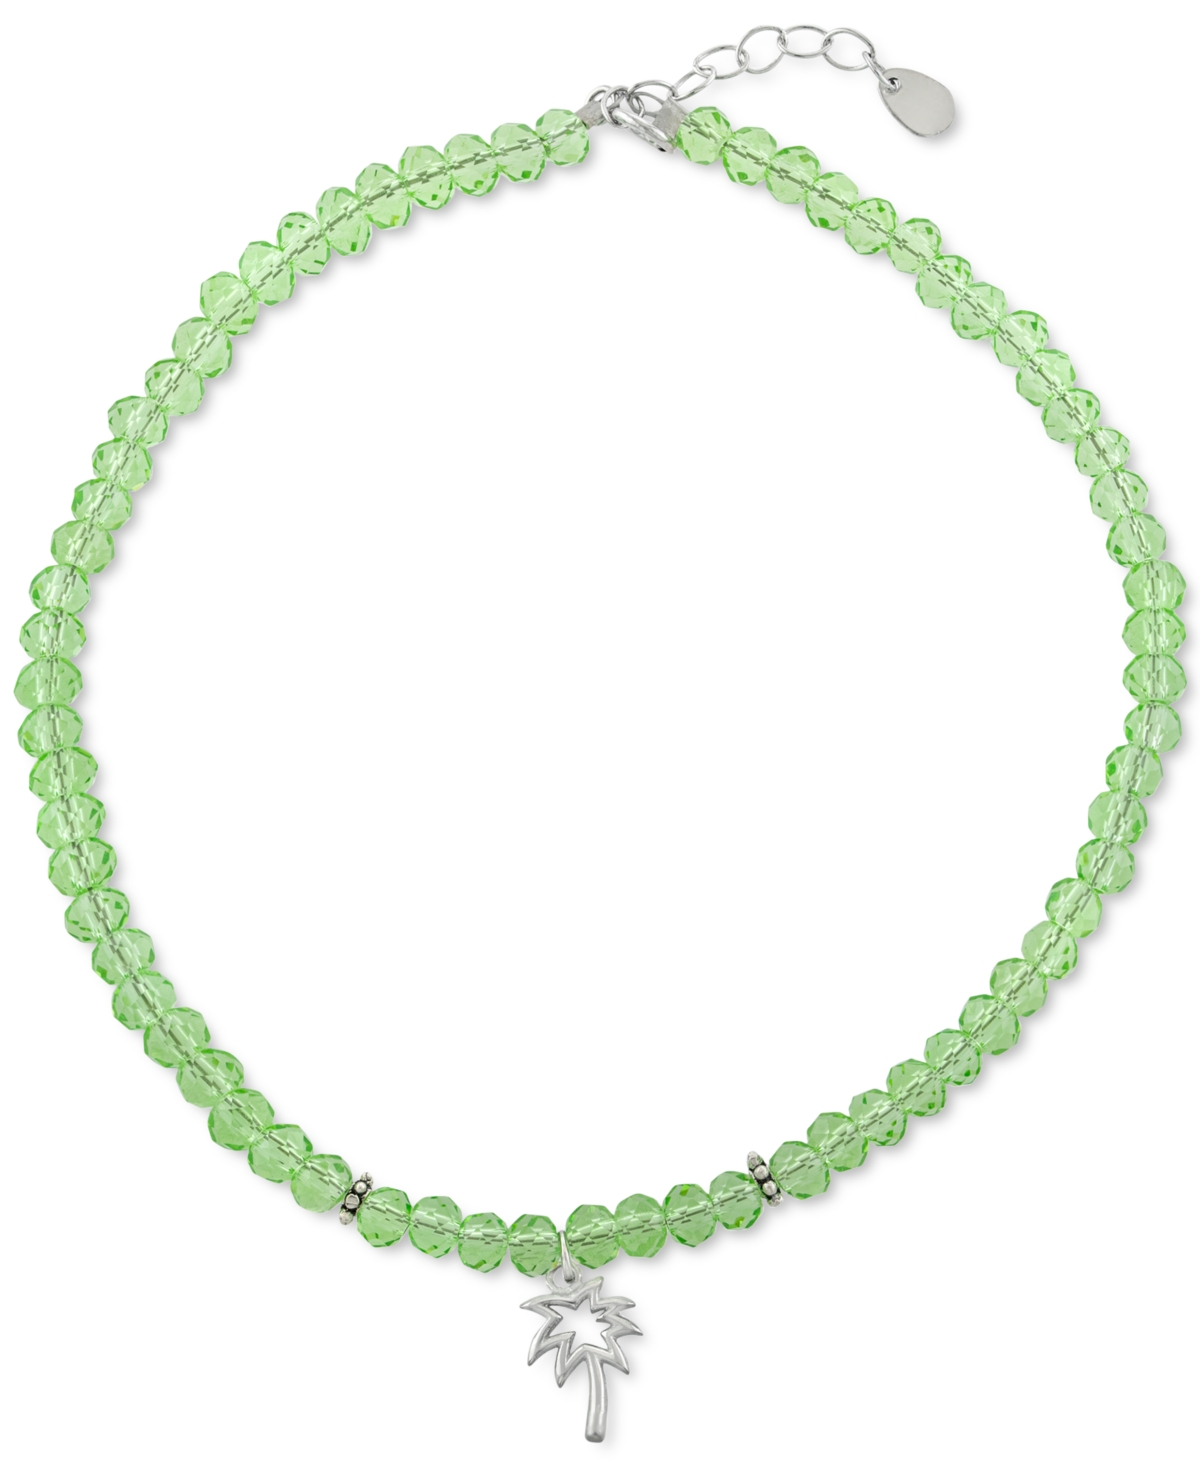 Green Crystal Bead Palm Tree Ankle Bracelet in Sterling Silver, Created for Macy's - Green Crystal